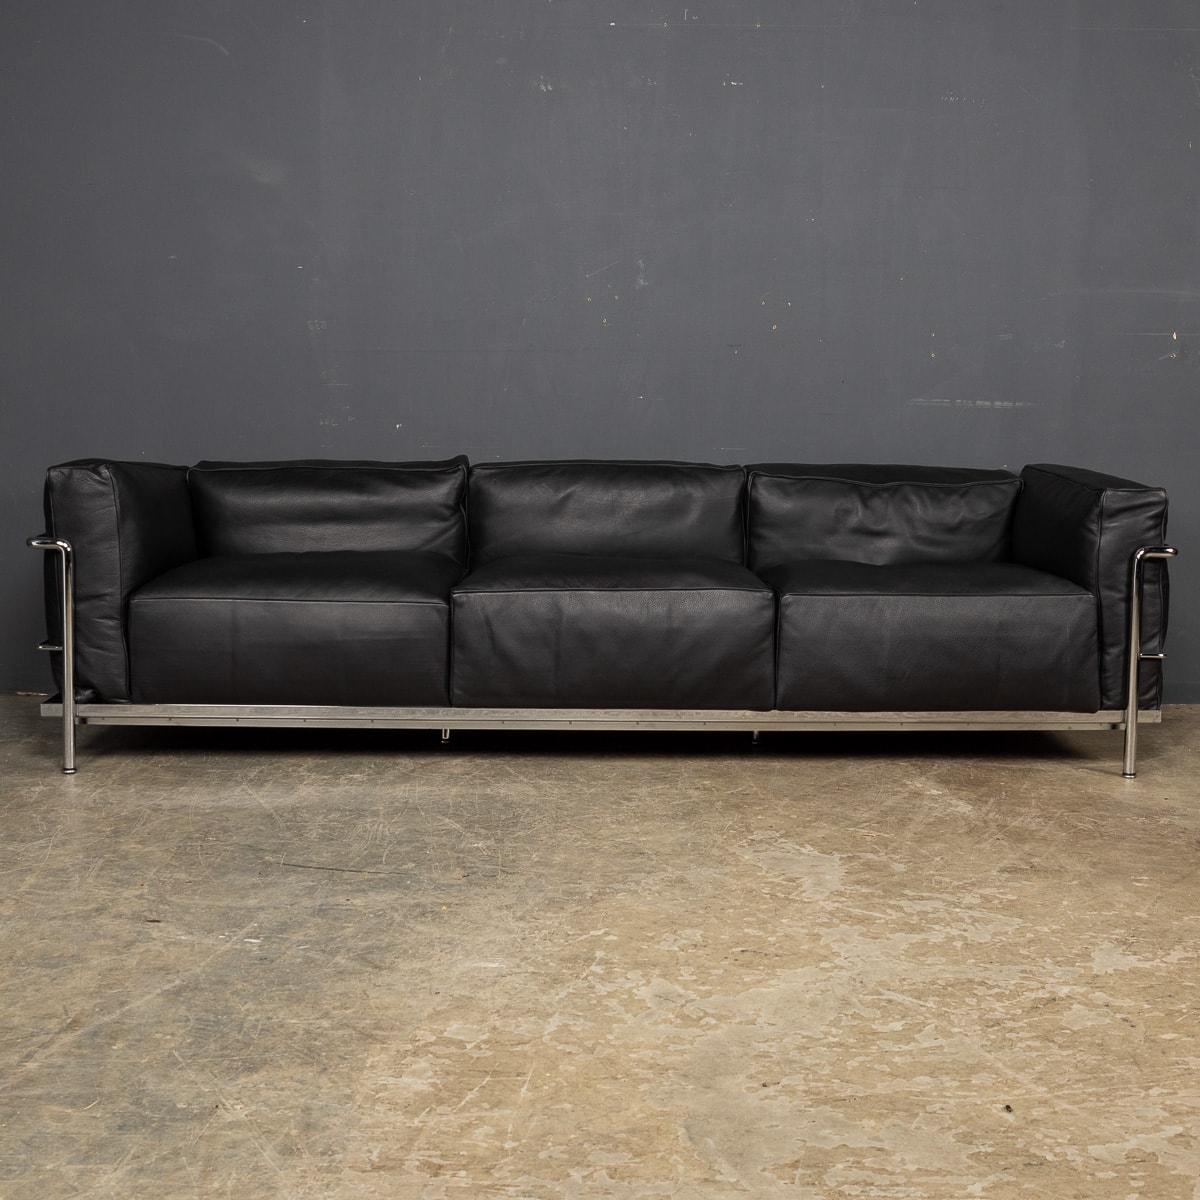 3 Fauteuil Grand Confort, Grand Modèle, Trois Places by Le Corbusier, designed by Pierre Jeanneret, Charlotte Perriand for Cassina is a 3-seater sofa made with a chromed structure and upholstered cushions made of leather. This sofa is an iconic